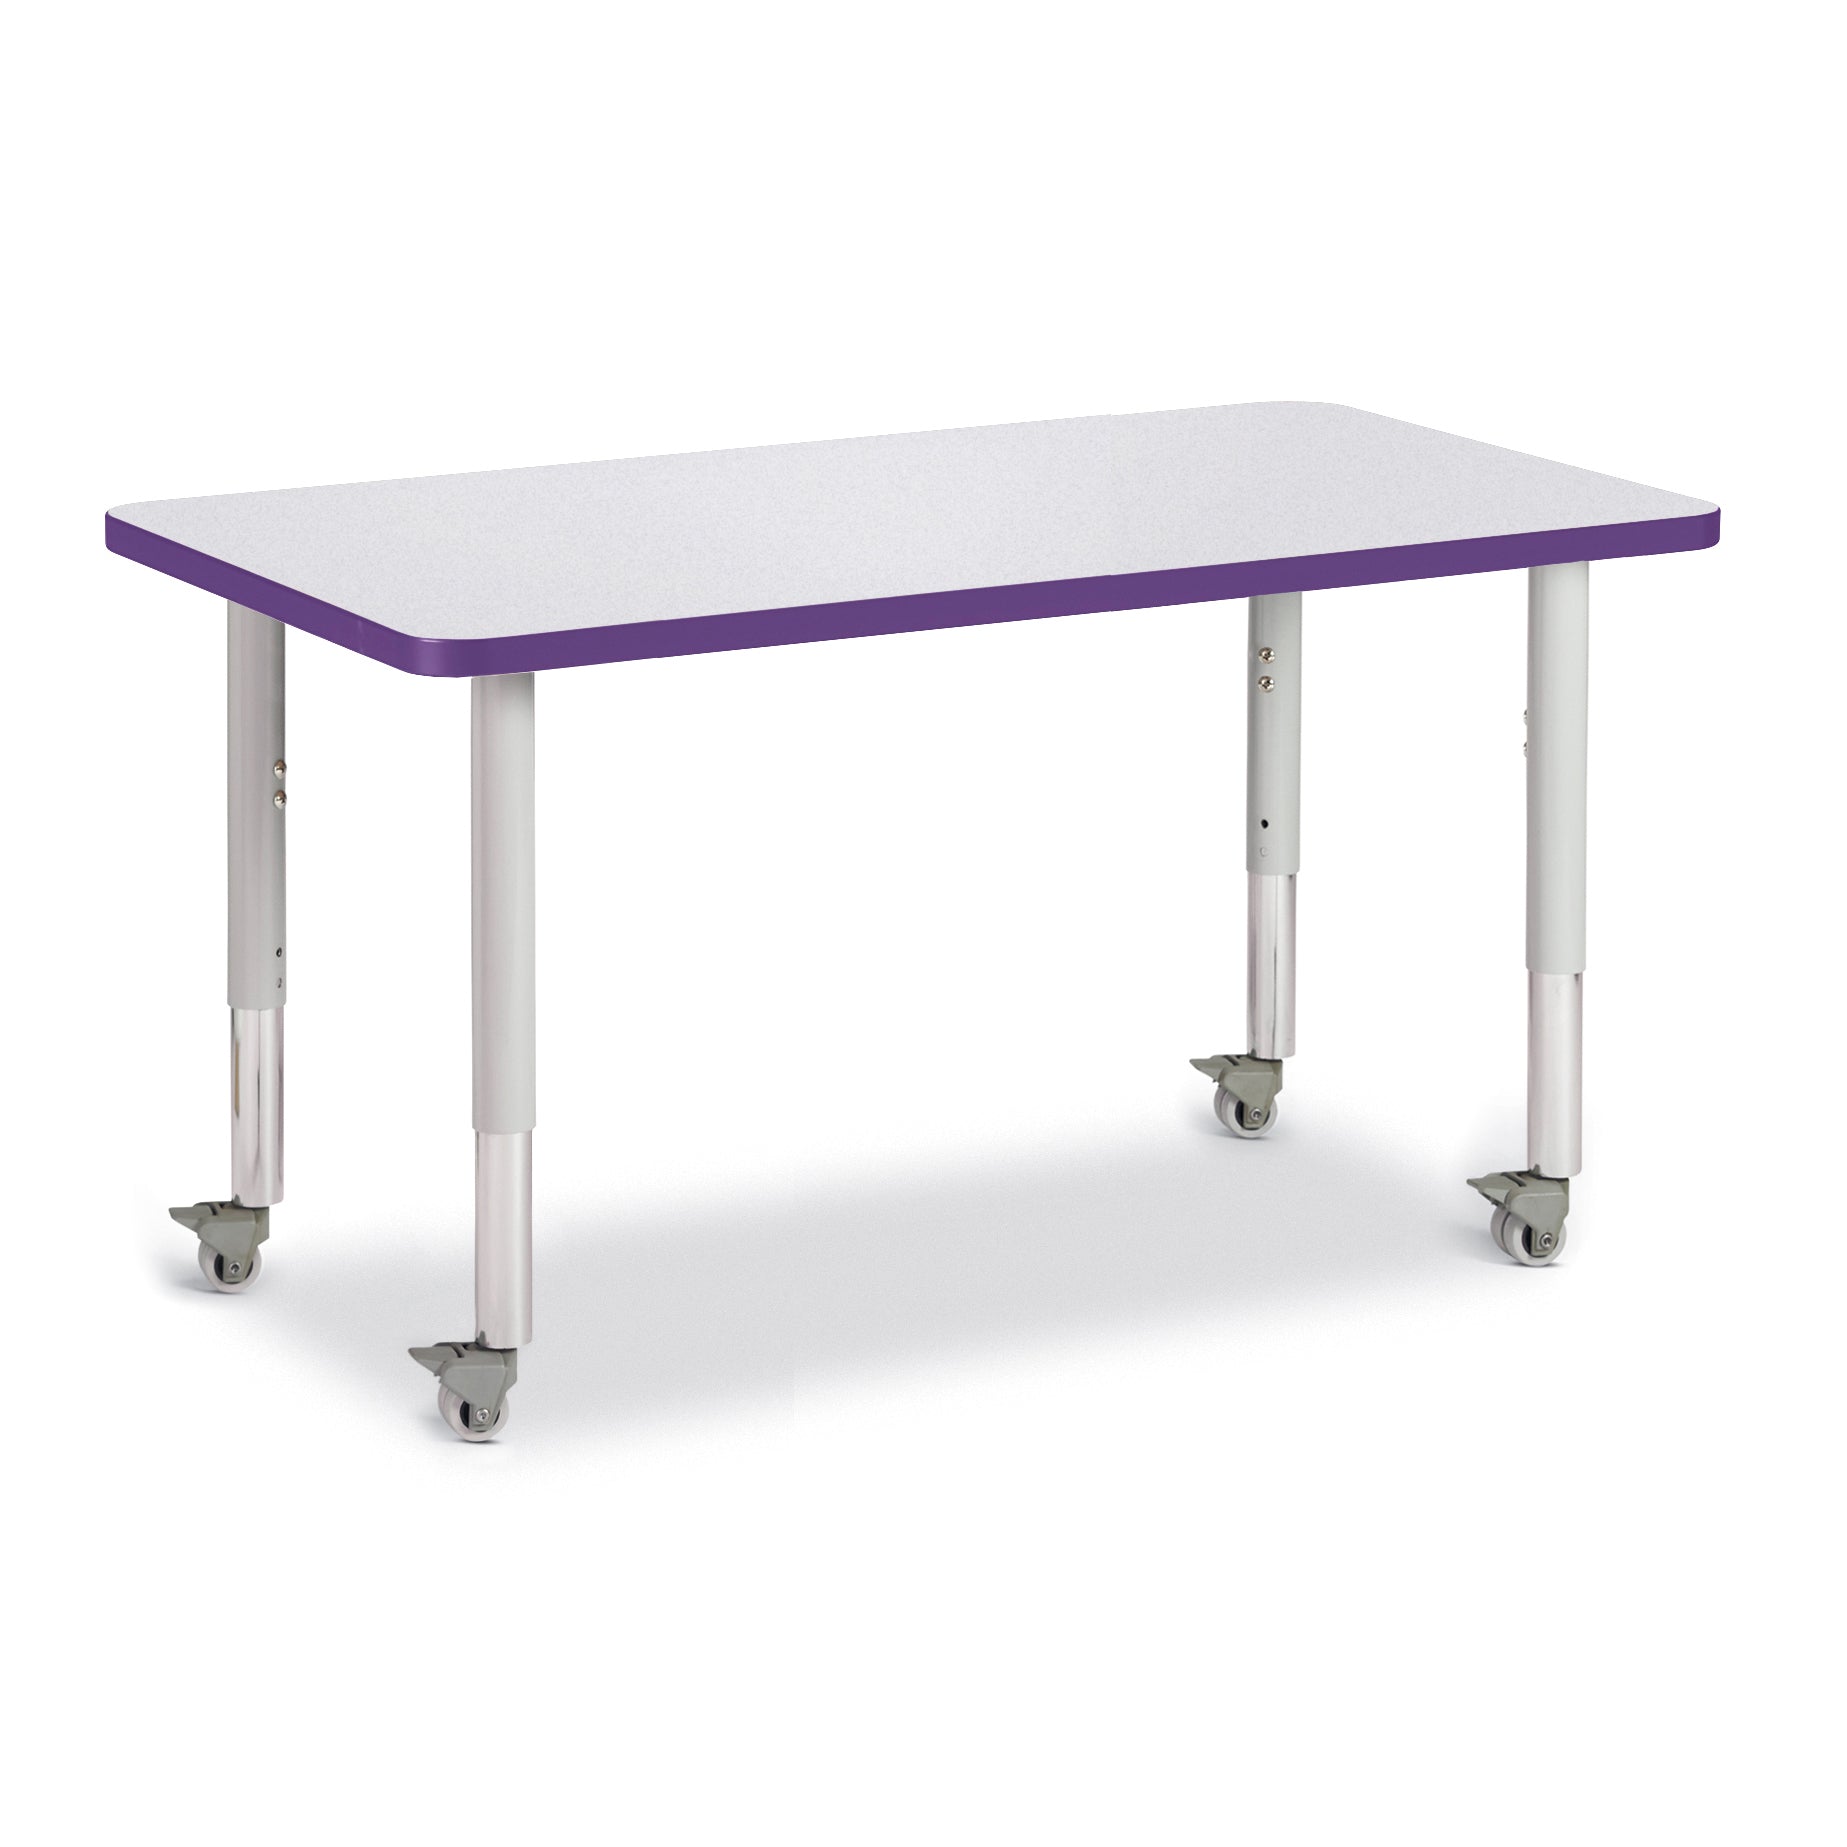 6478JCM004, Berries Rectangle Activity Table - 24" X 36", Mobile - Freckled Gray/Purple/Gray